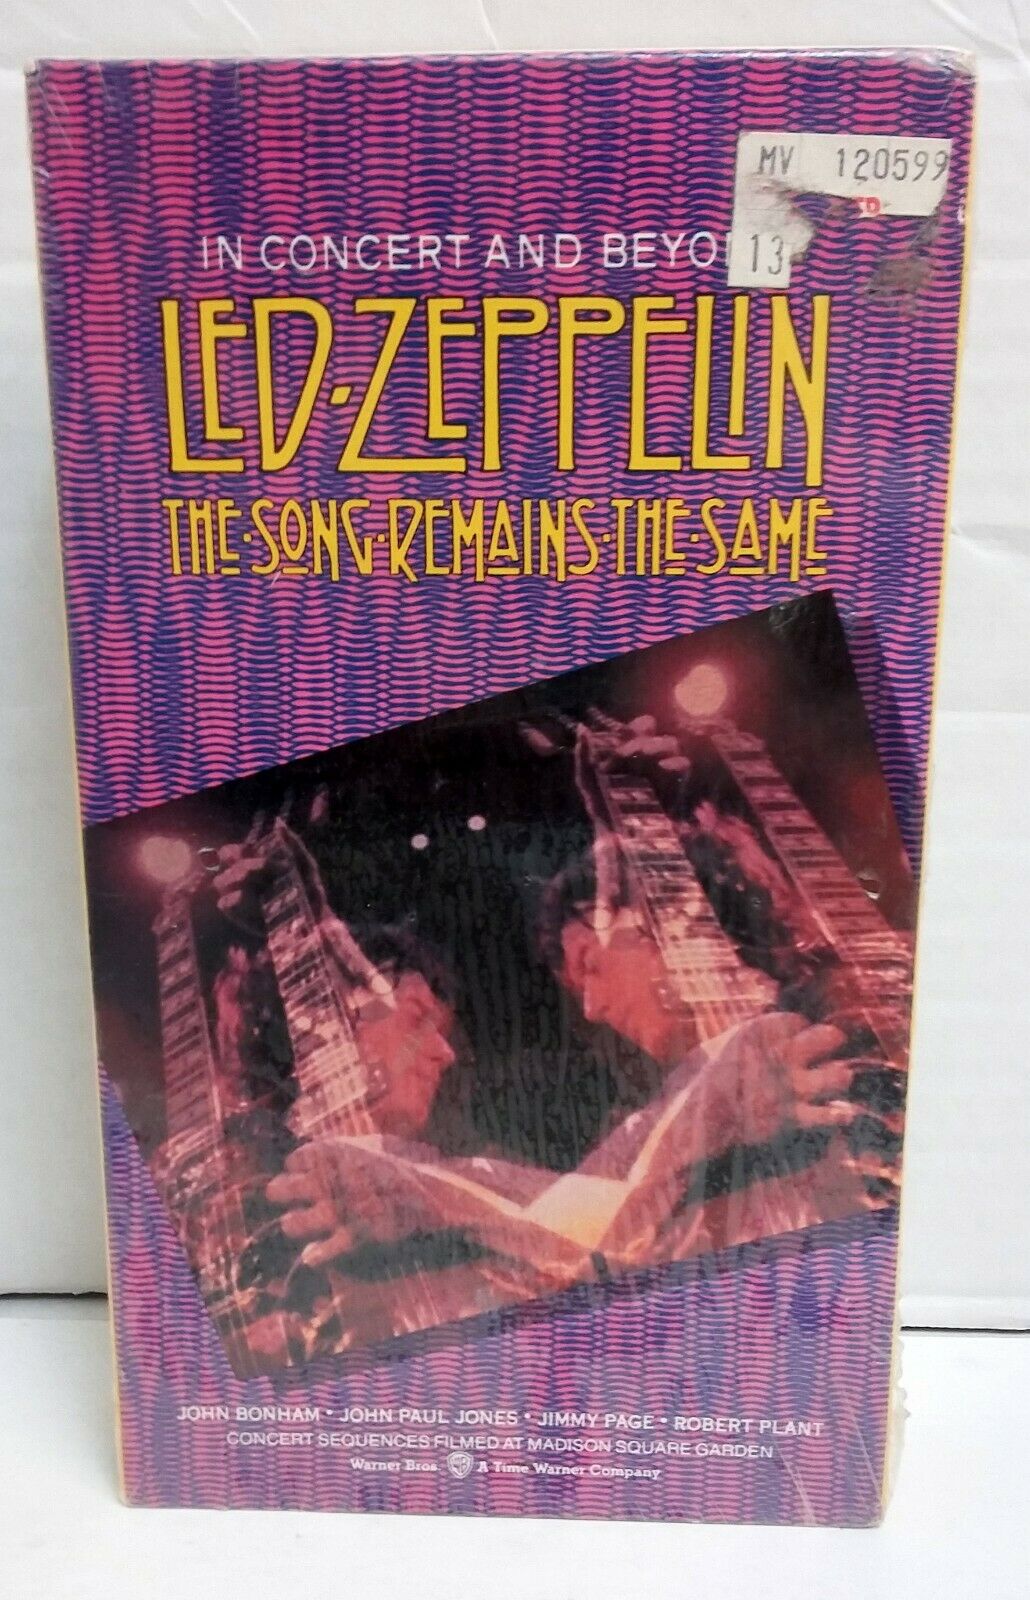 Led Zeppelin: The Song Remains the Same SEALED VHS 1997 In Concert and Beyond